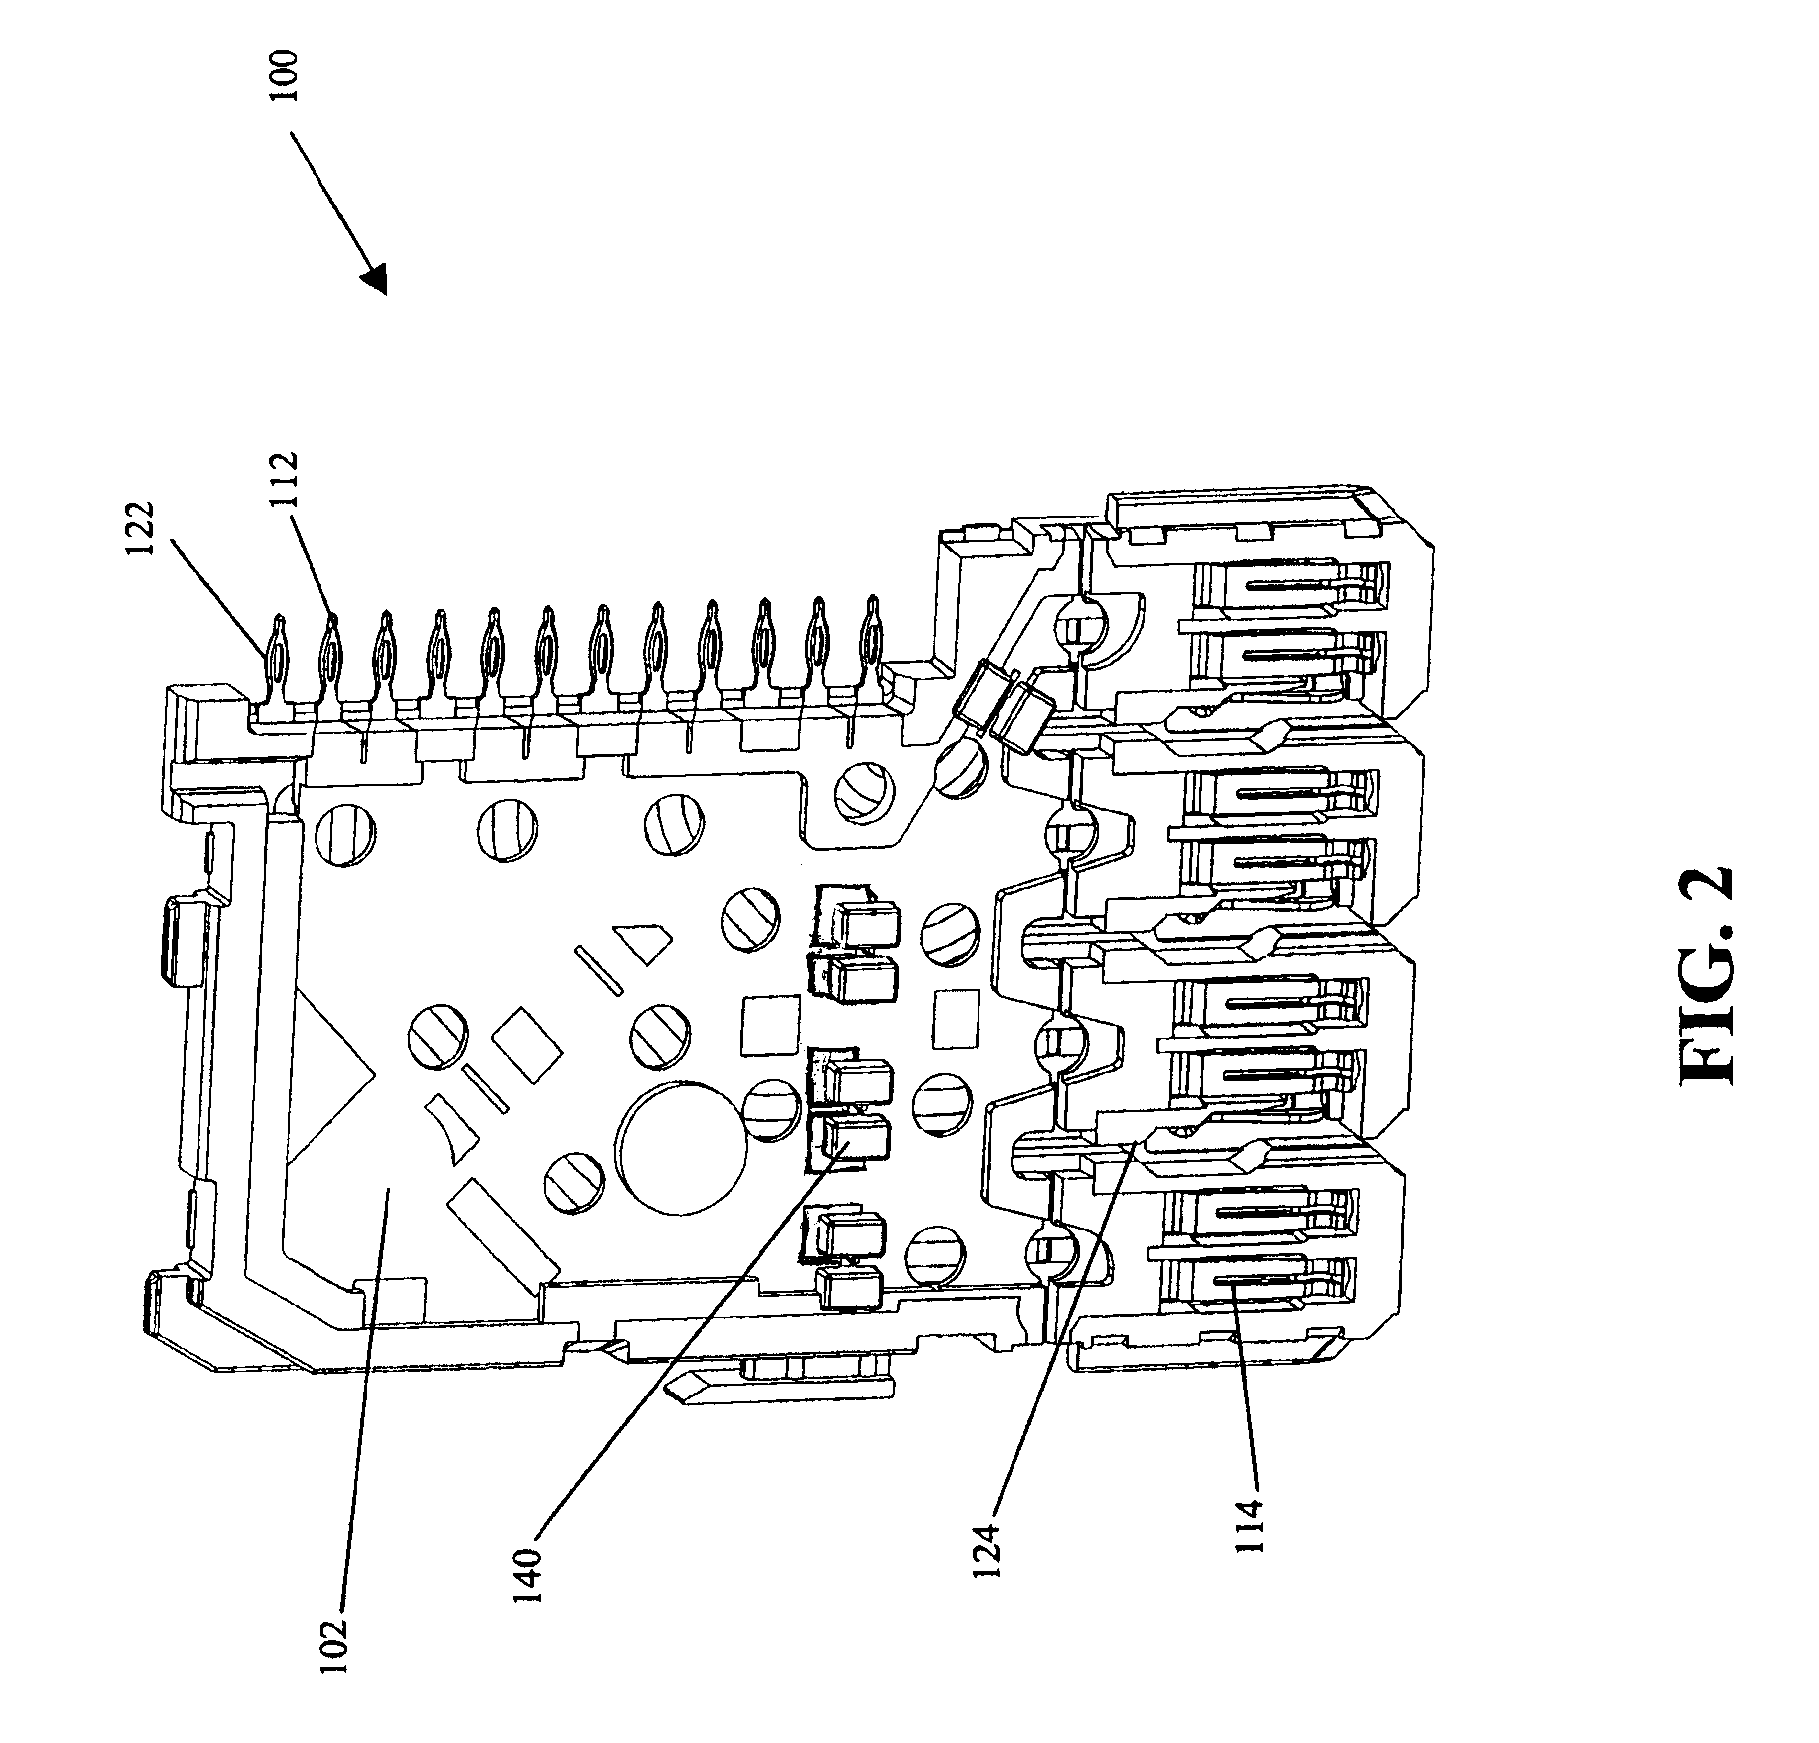 Electrical connector incorporating passive circuit elements